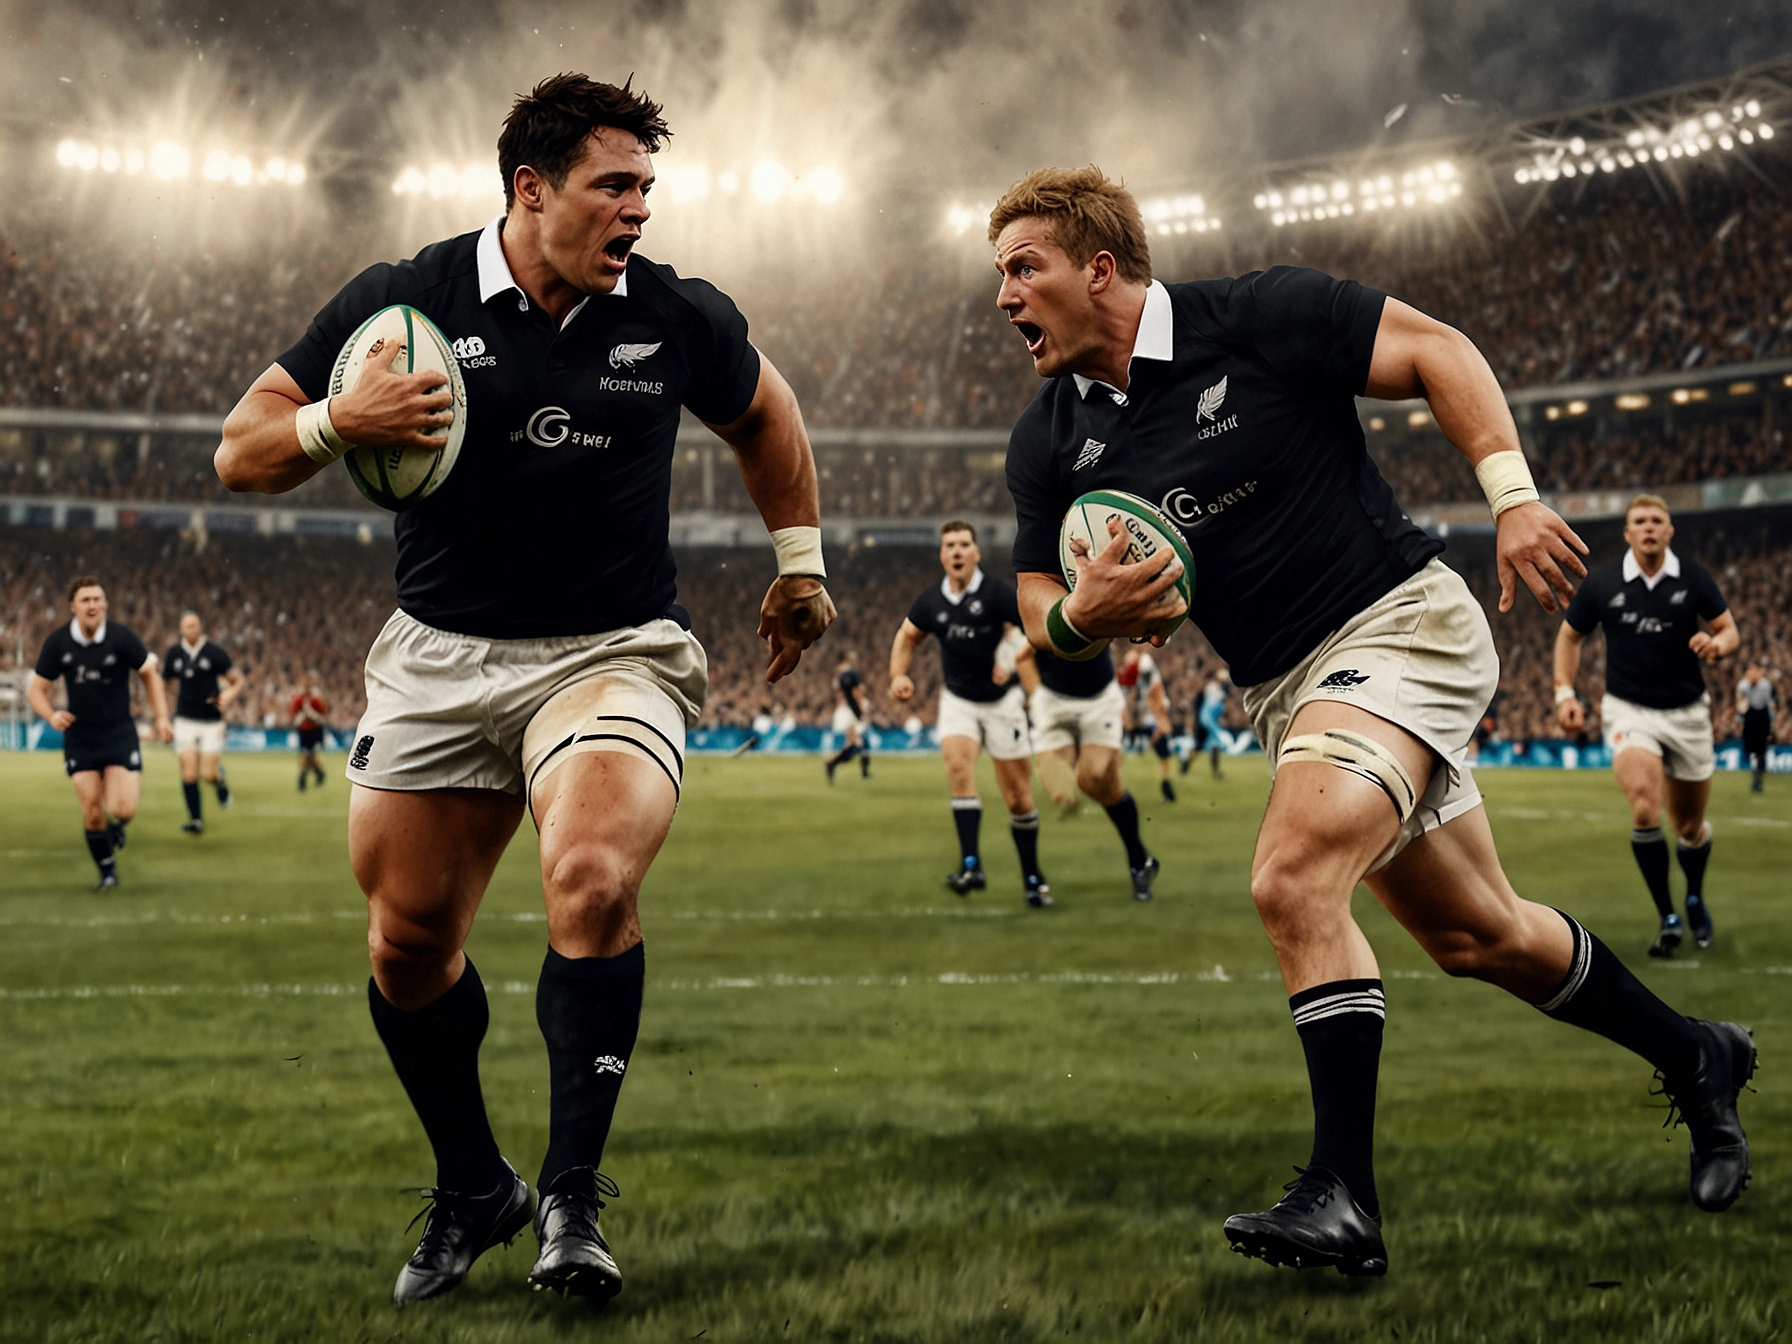 A high-action image of a past match between the All Blacks and England, illustrating the intense competition and physical prowess characteristic of their historic encounters.